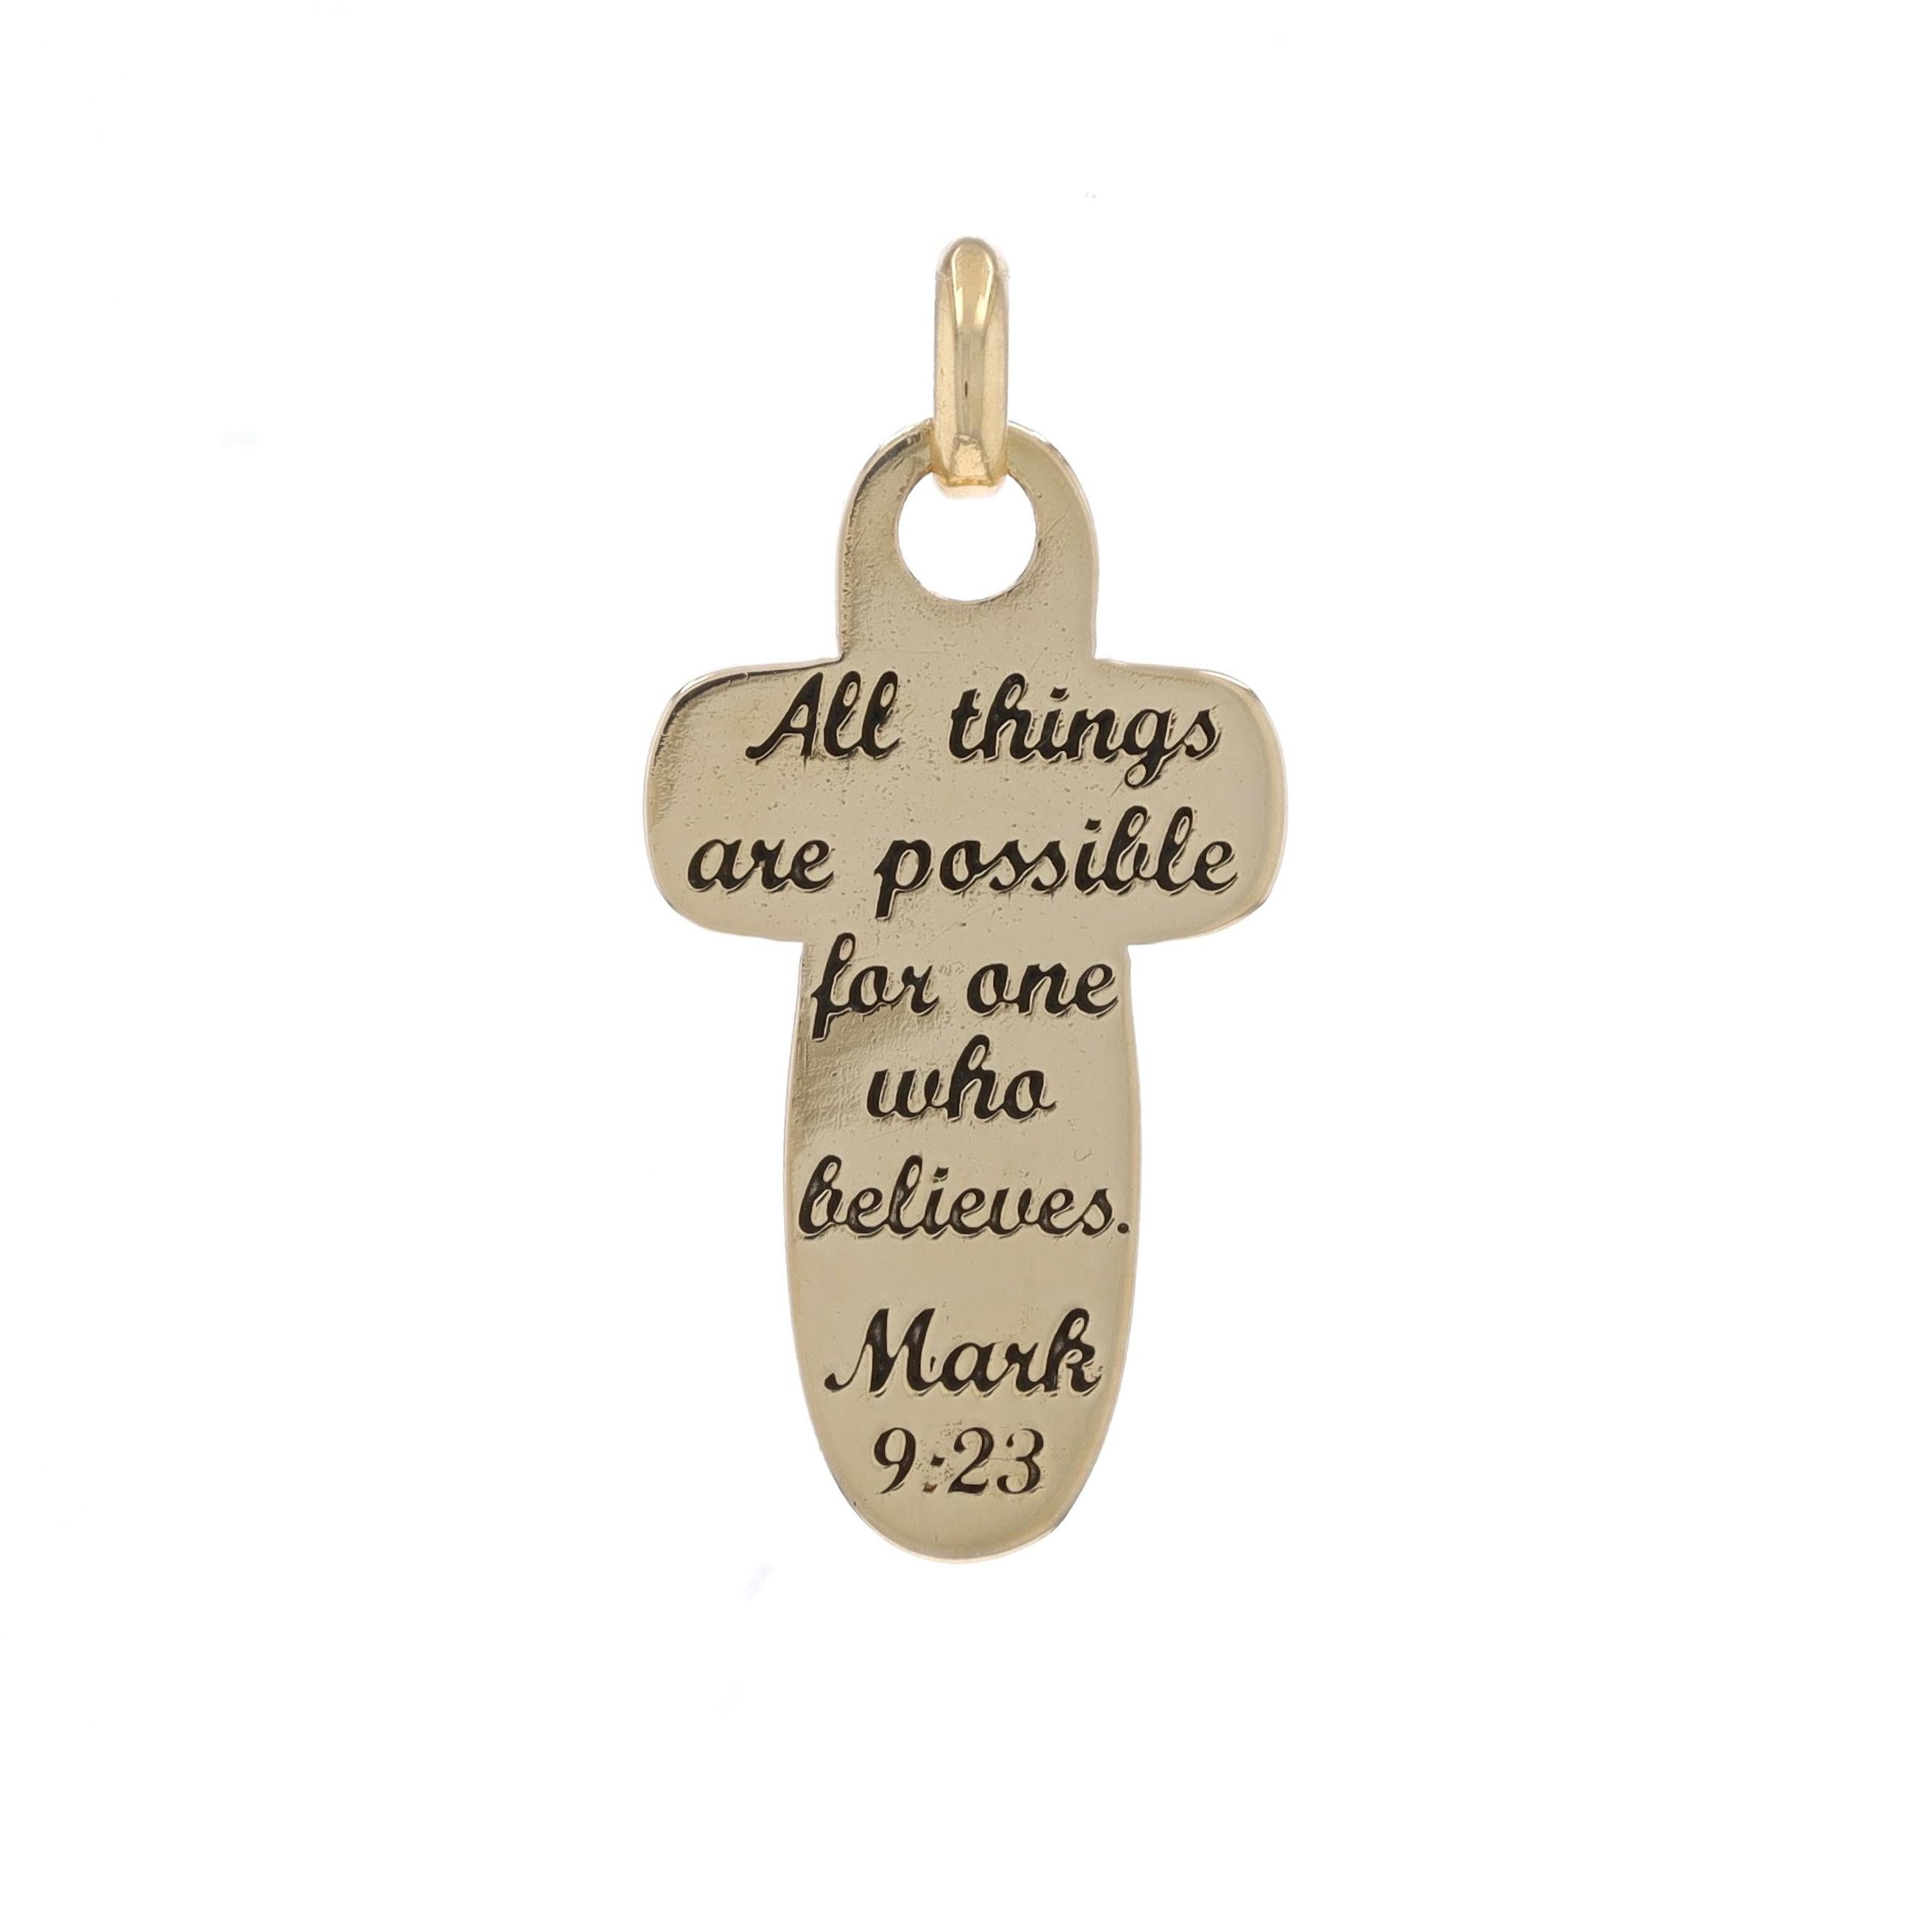 Metal Content: 14k Yellow Gold

Theme: All Things Are Possible Cross, Mark 9:23, Faith

Measurements

Tall: 1 1/16